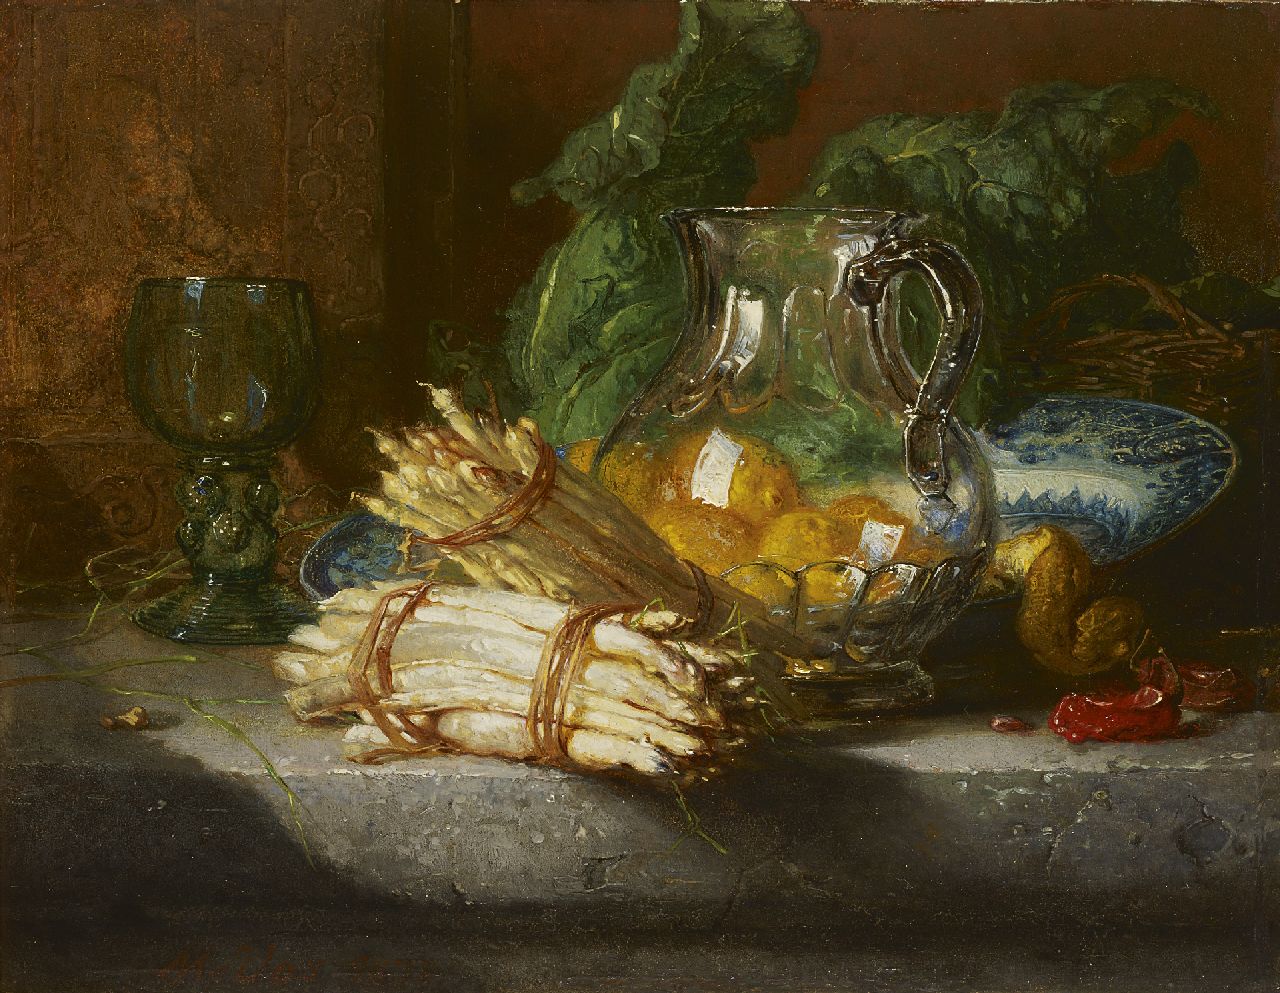 Vos M.  | Maria Vos, A still life with asparagus and lemons, Öl auf Holz 24,6 x 32,1 cm, signed l.l. and reverse on label und painted 1877